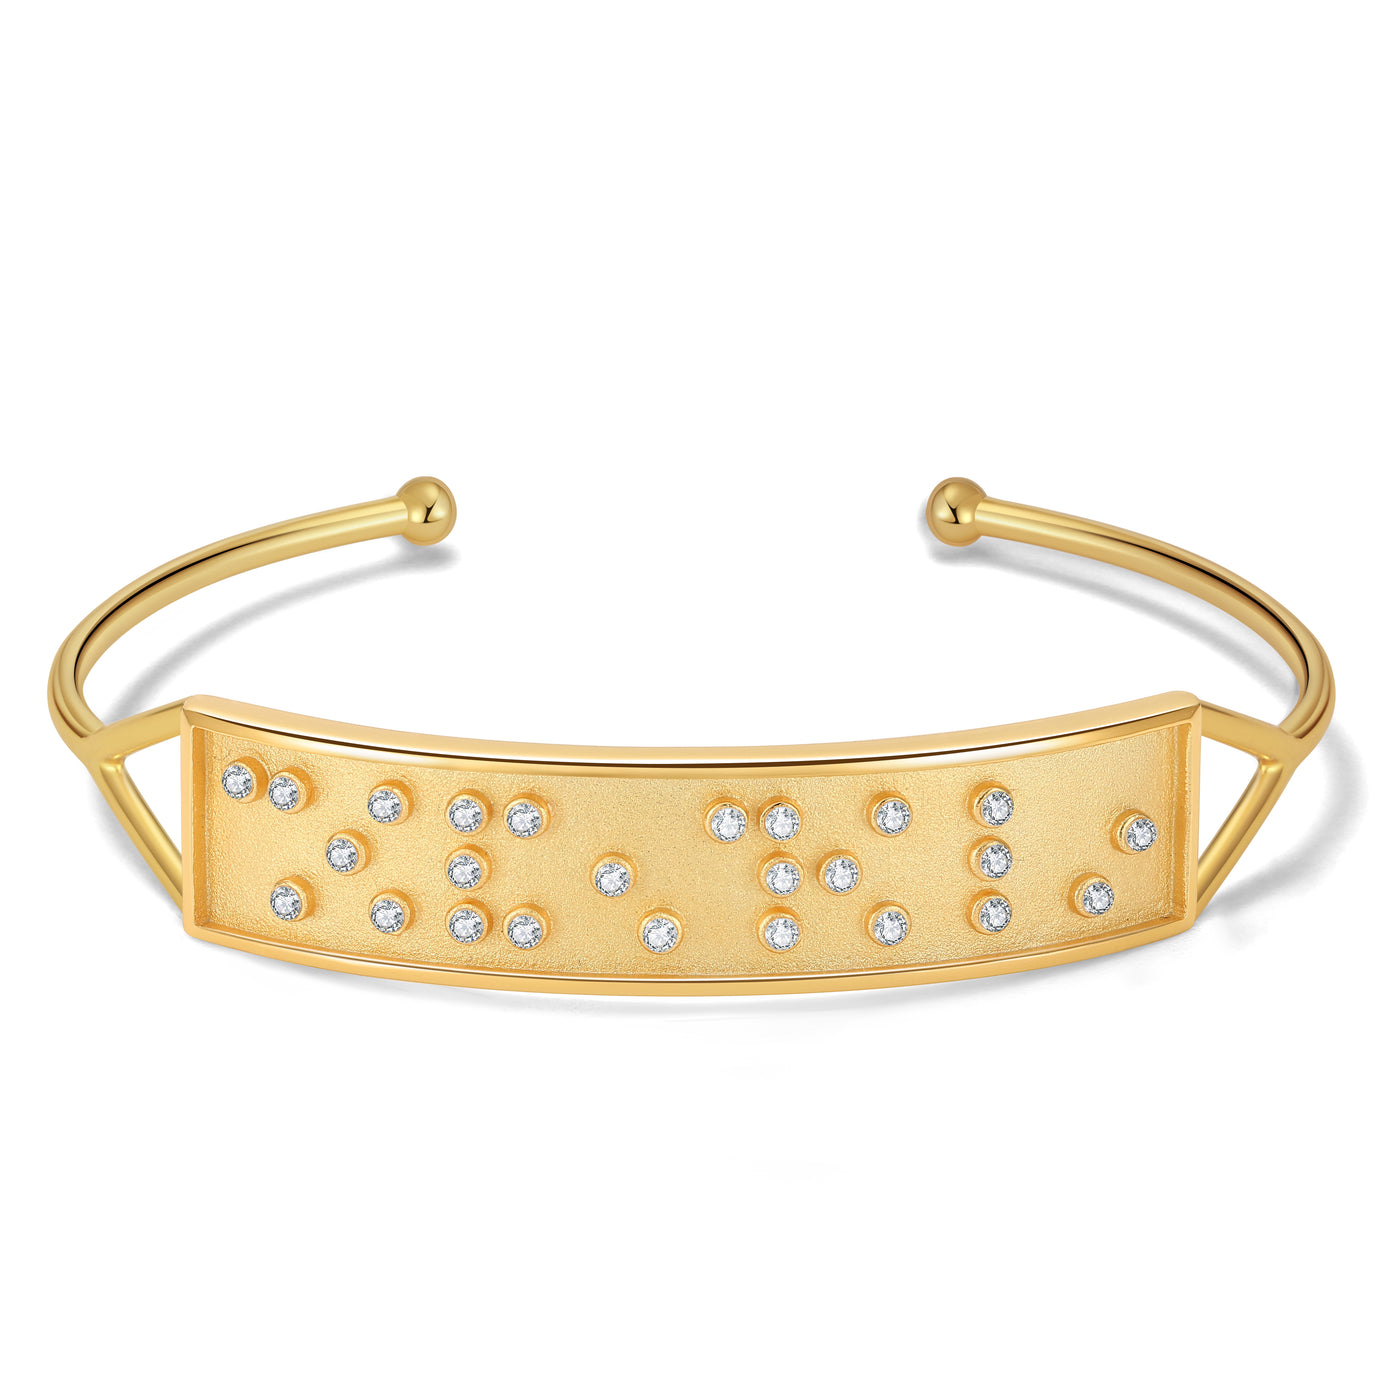 Touchstone I LOVE YOU Braille Inspired Gold Cuff Bracelet